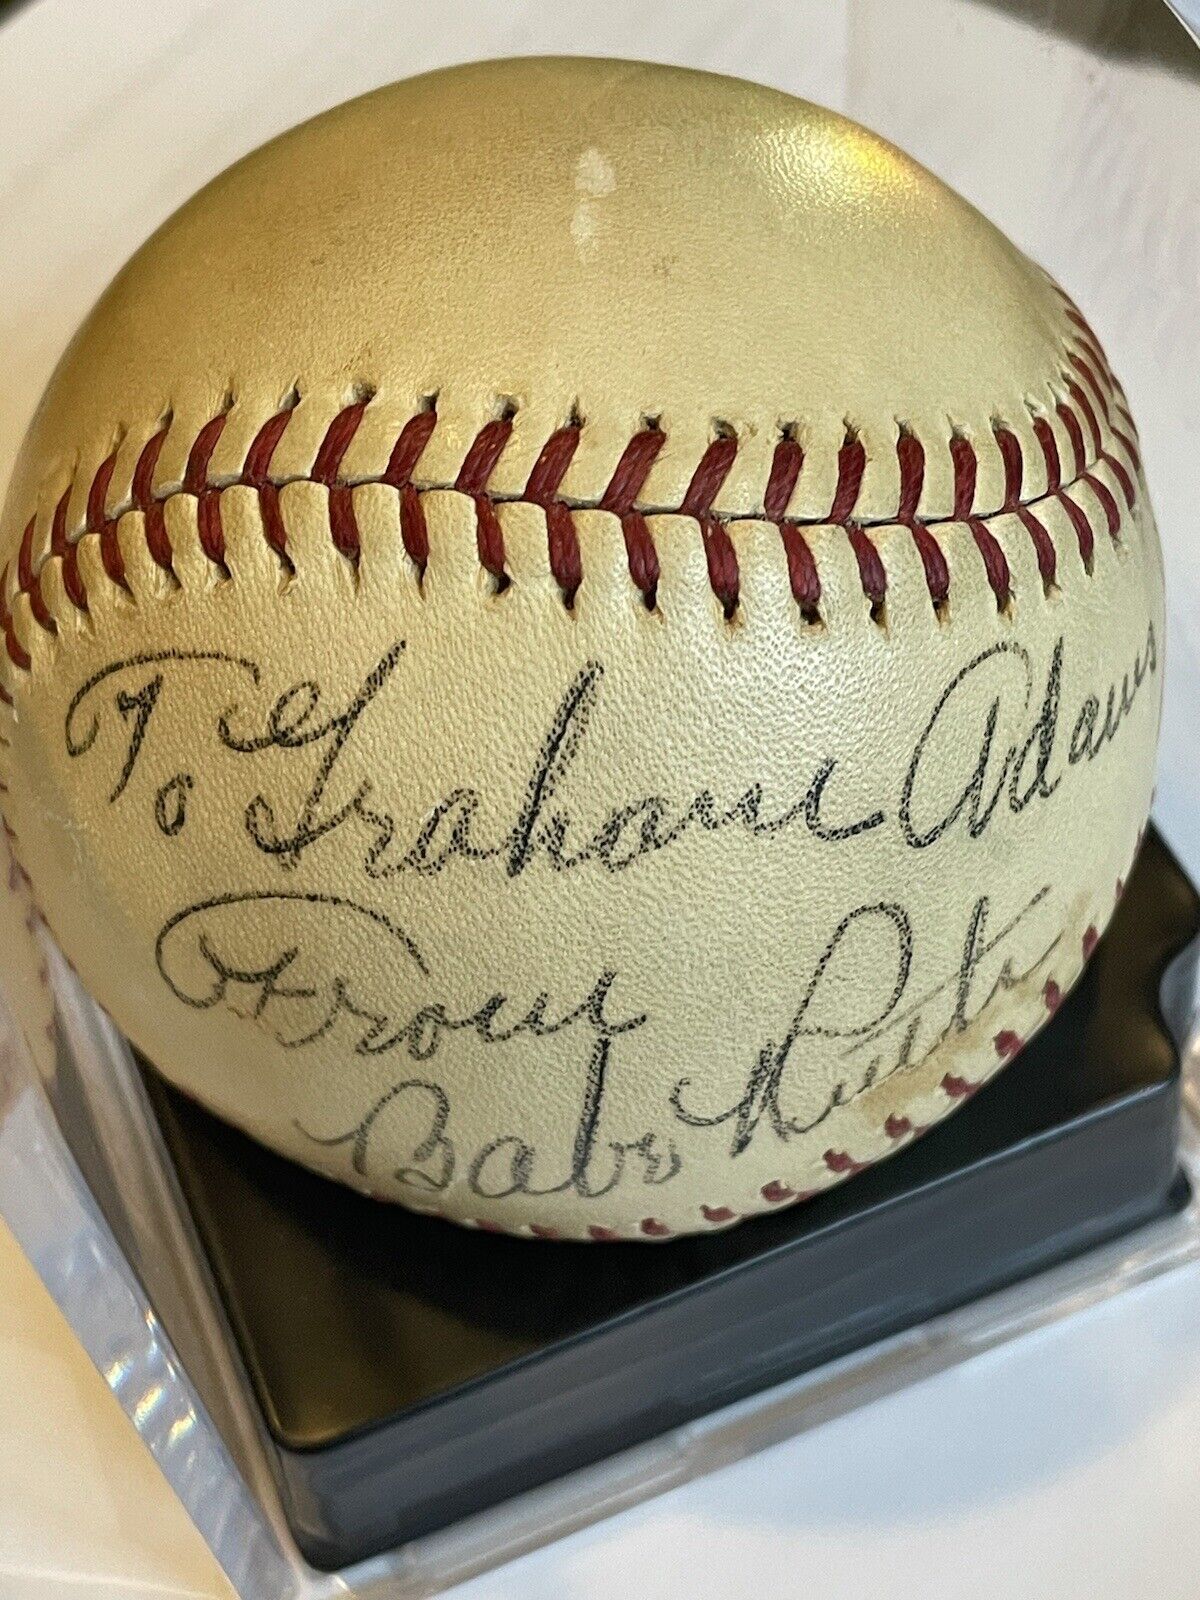 Babe Ruth Ball Autographed Baseball Signed PSA Authentic 6.0 American League